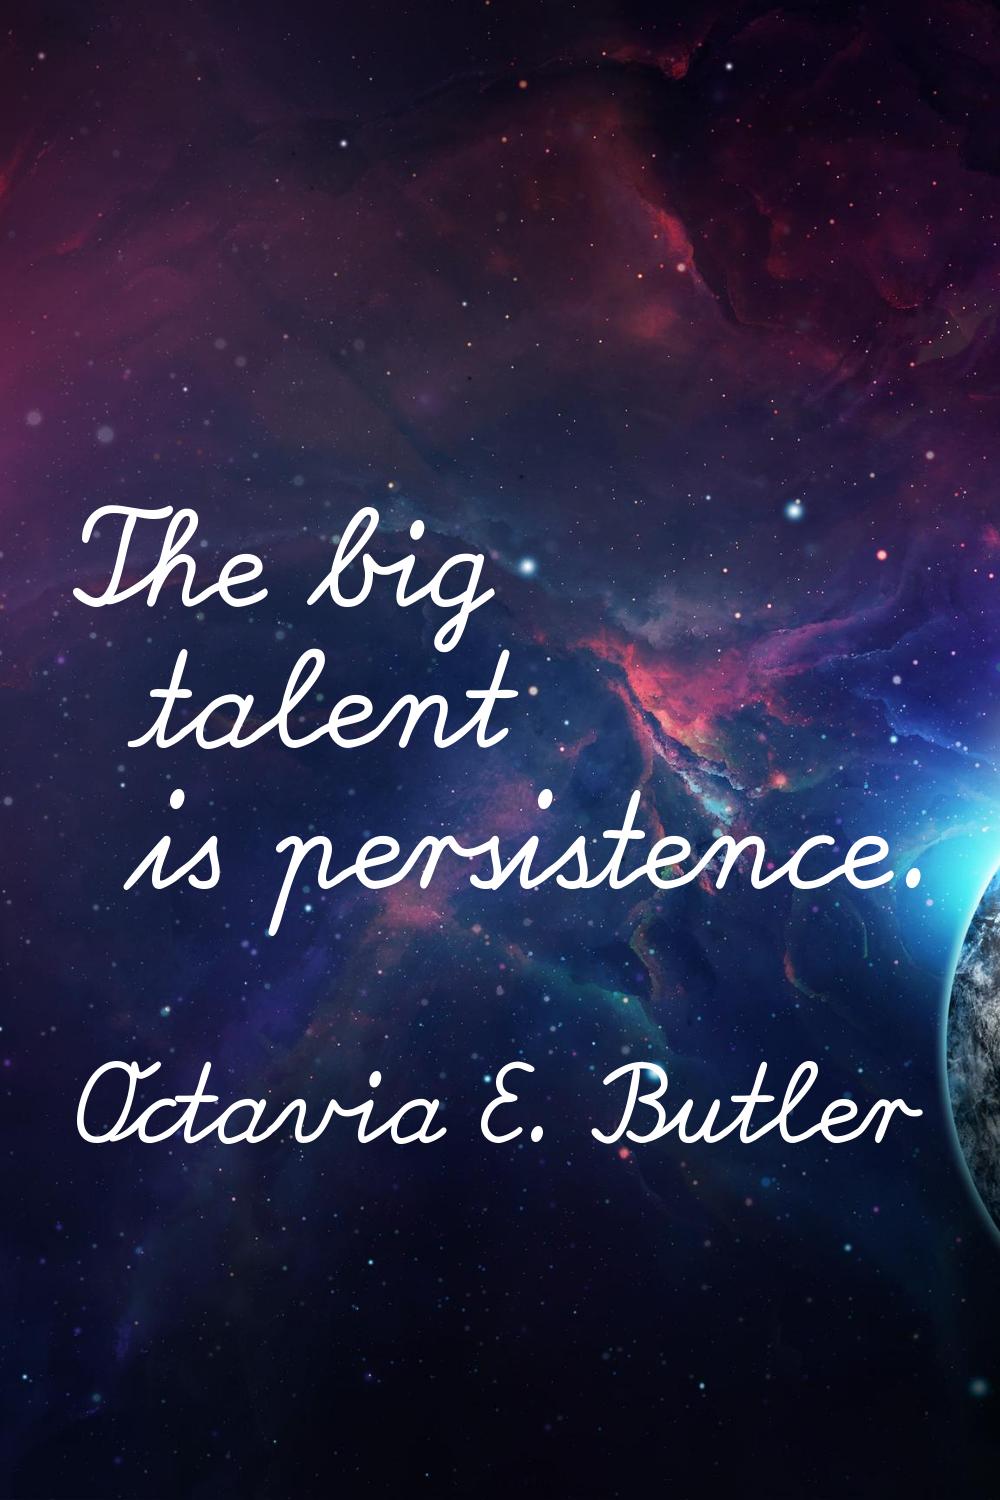 The big talent is persistence.